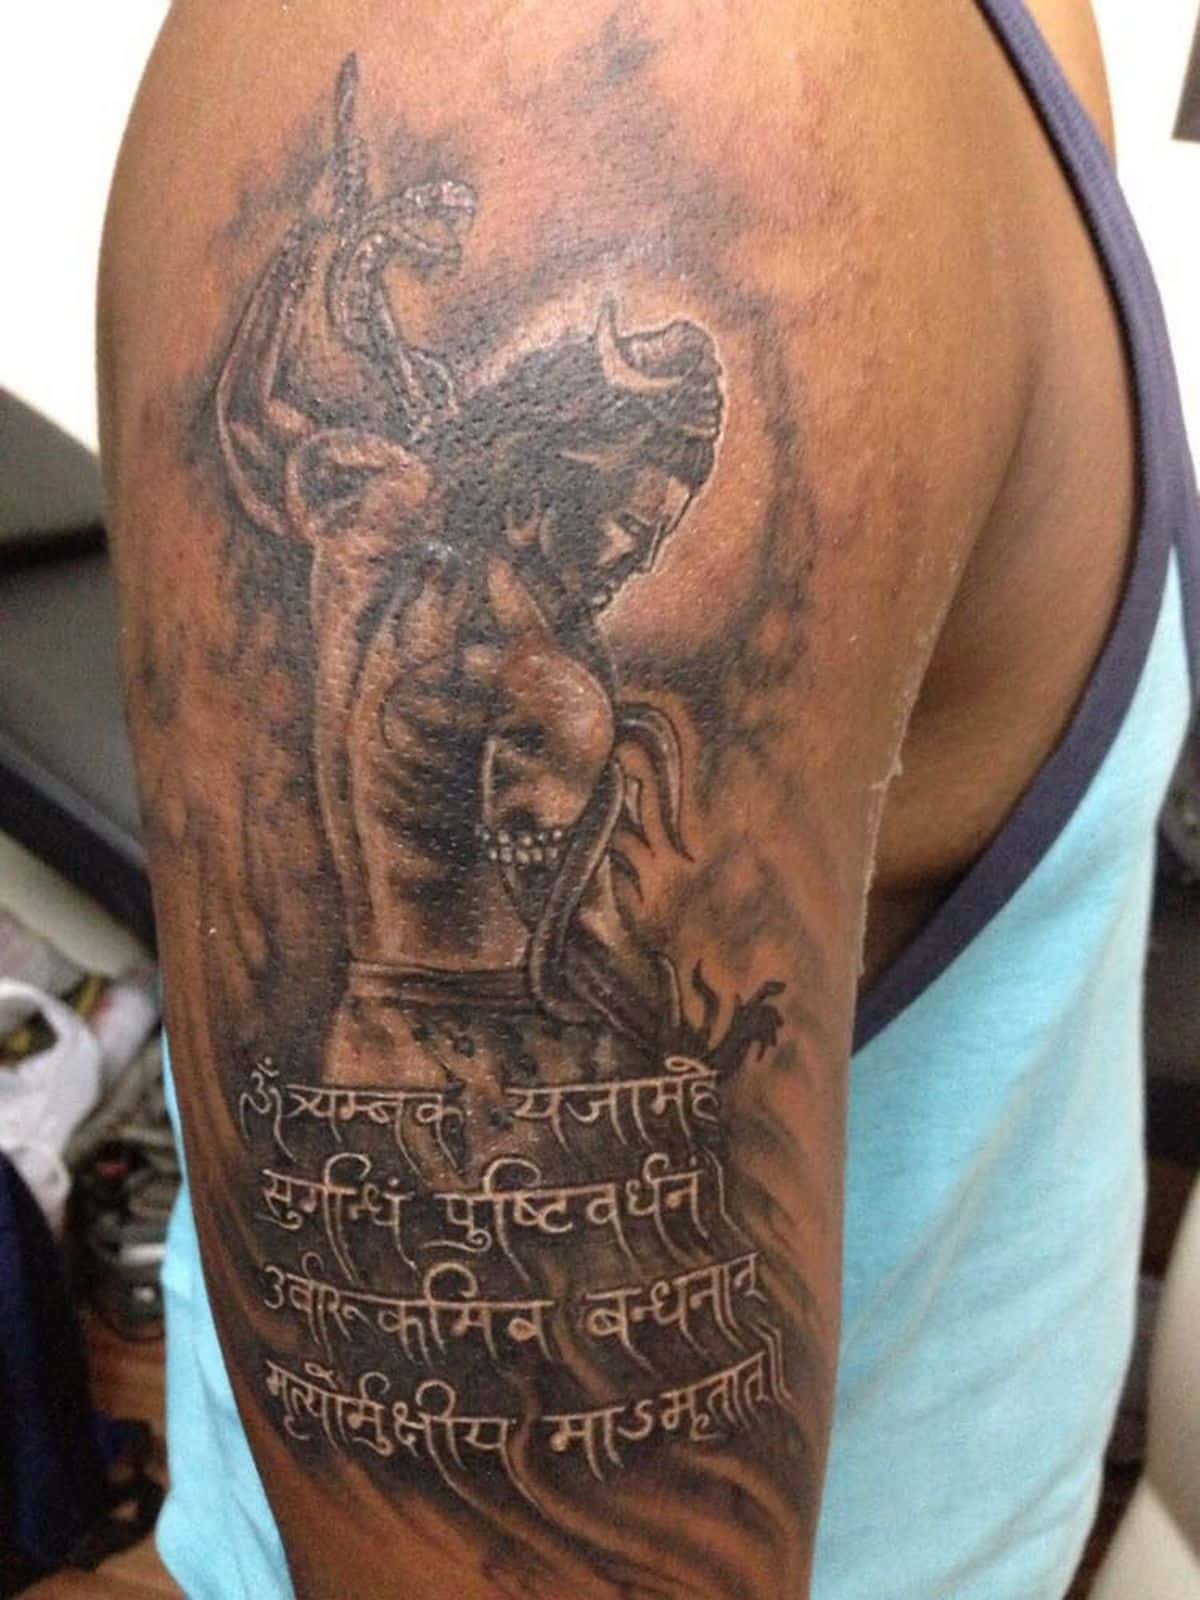 Live Love Laugh Body Art - Trishul tattoo...It's not a weapon• it's defines  Will * Action * wisdom...bam bhole love✌🏼 Contact Shobhit 9999912156 Live  love laugh body art | Facebook